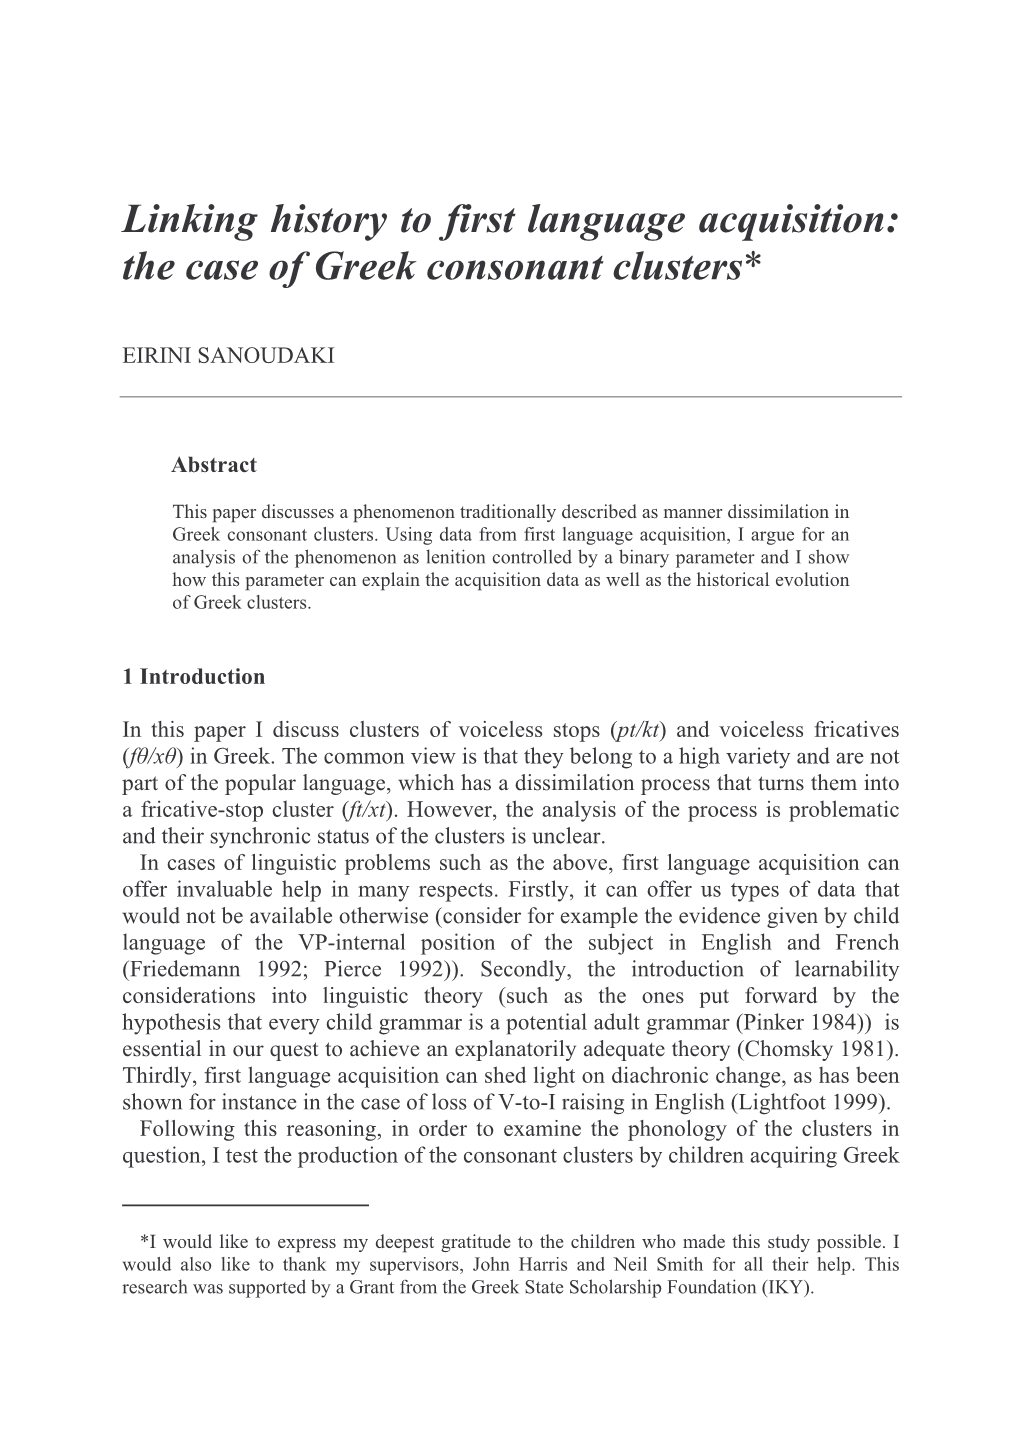 The Case of Greek Consonant Clusters*